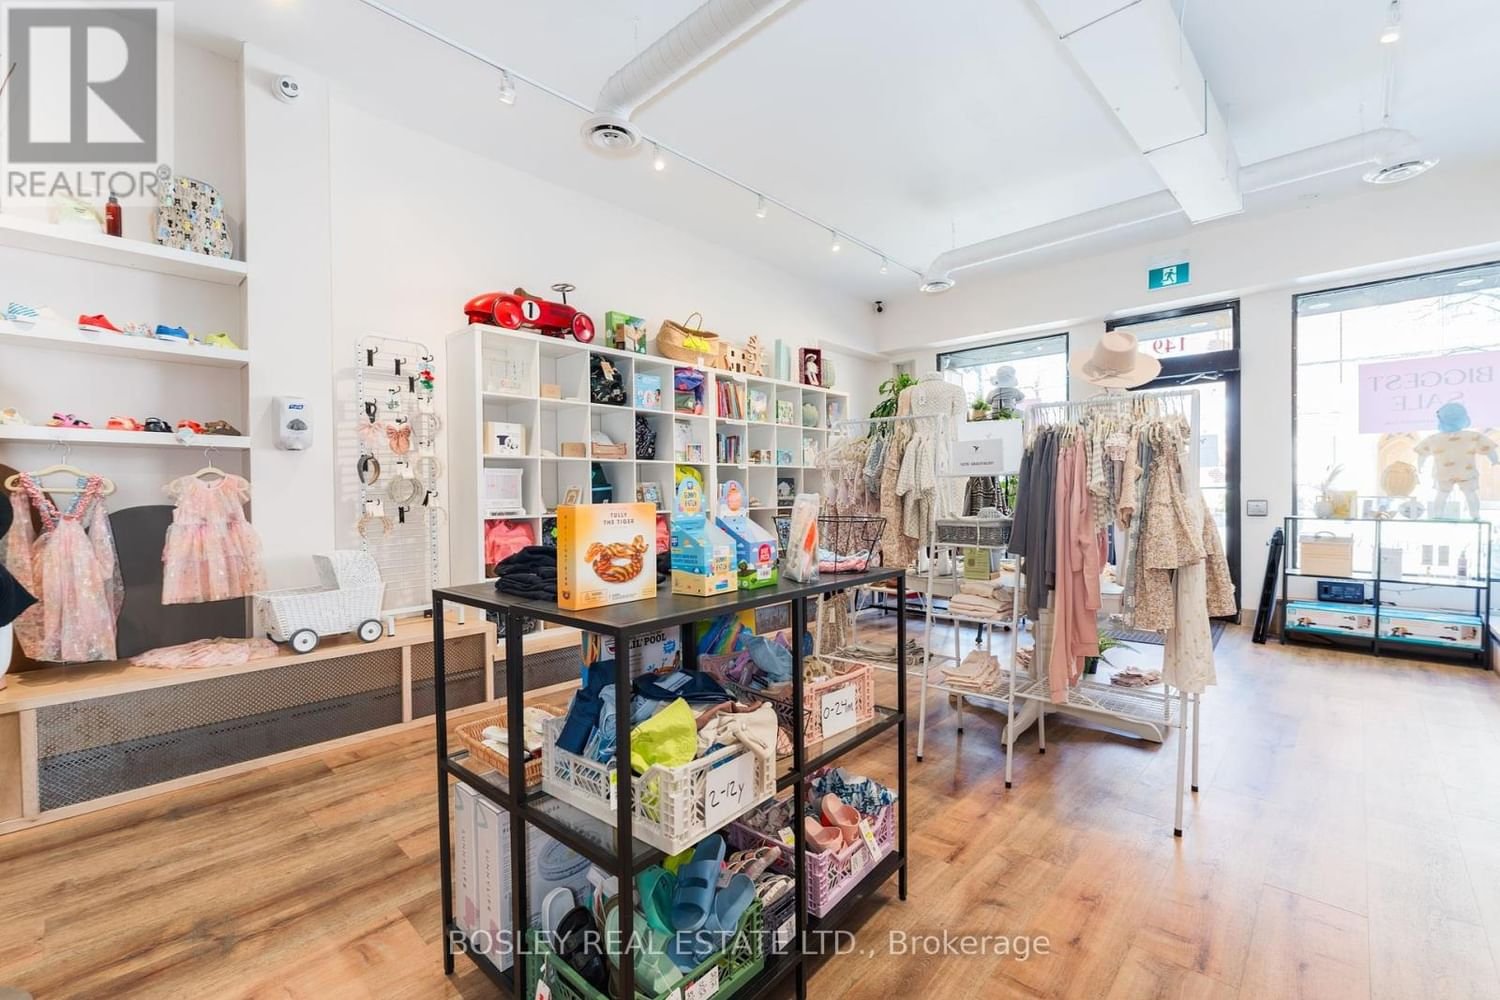 #MAIN -149 RONCESVALLES AVE Image 4